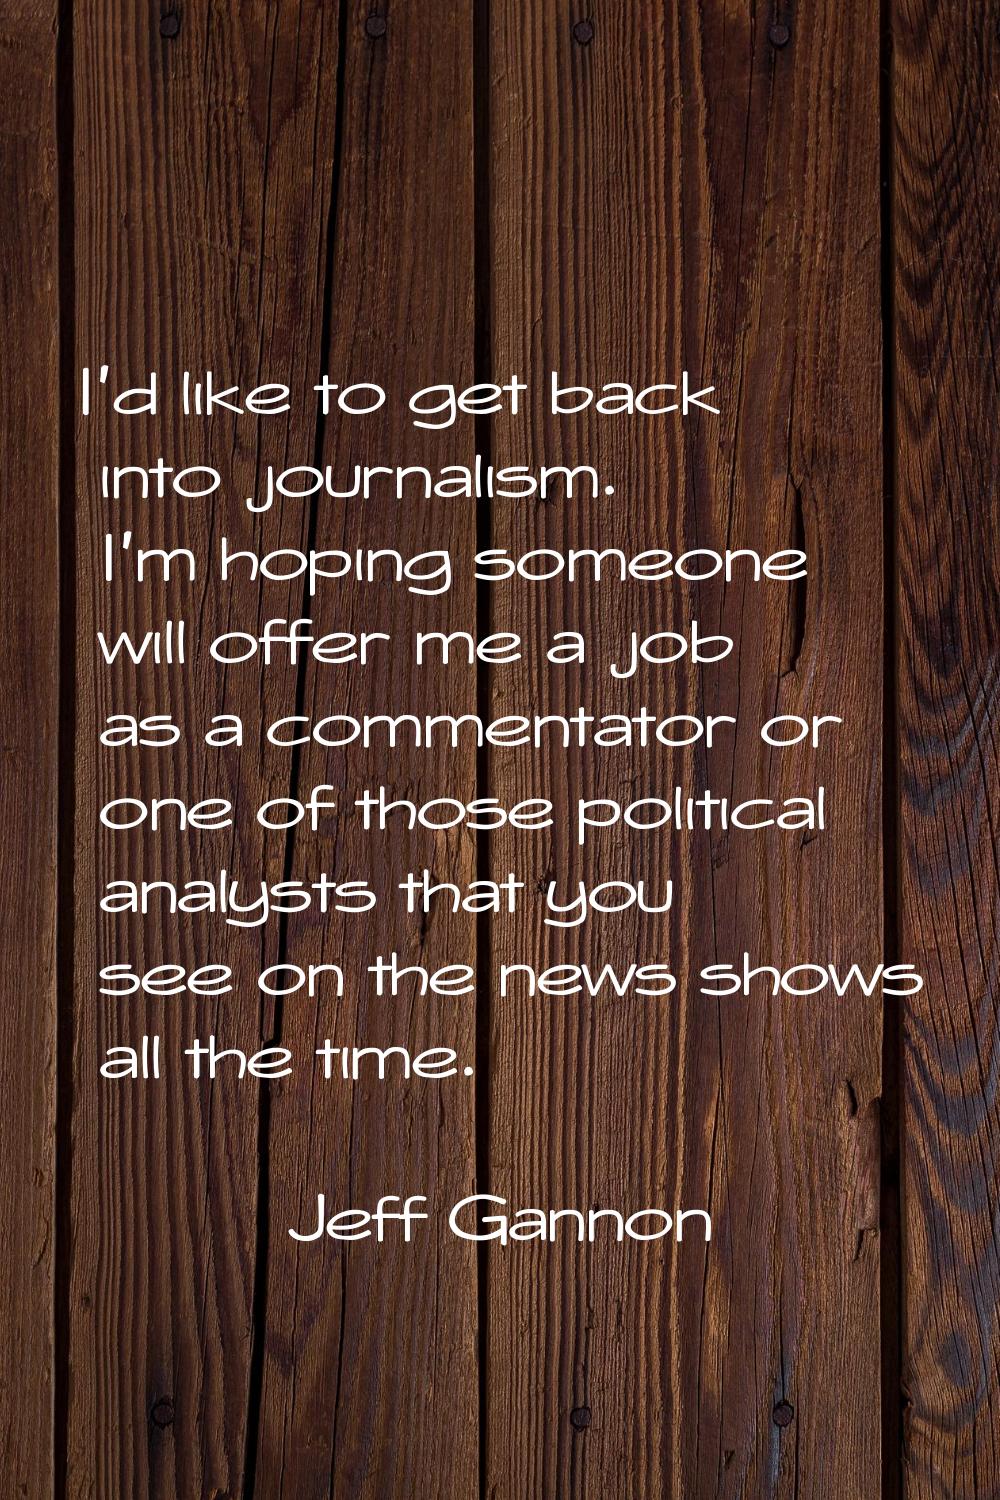 I'd like to get back into journalism. I'm hoping someone will offer me a job as a commentator or on